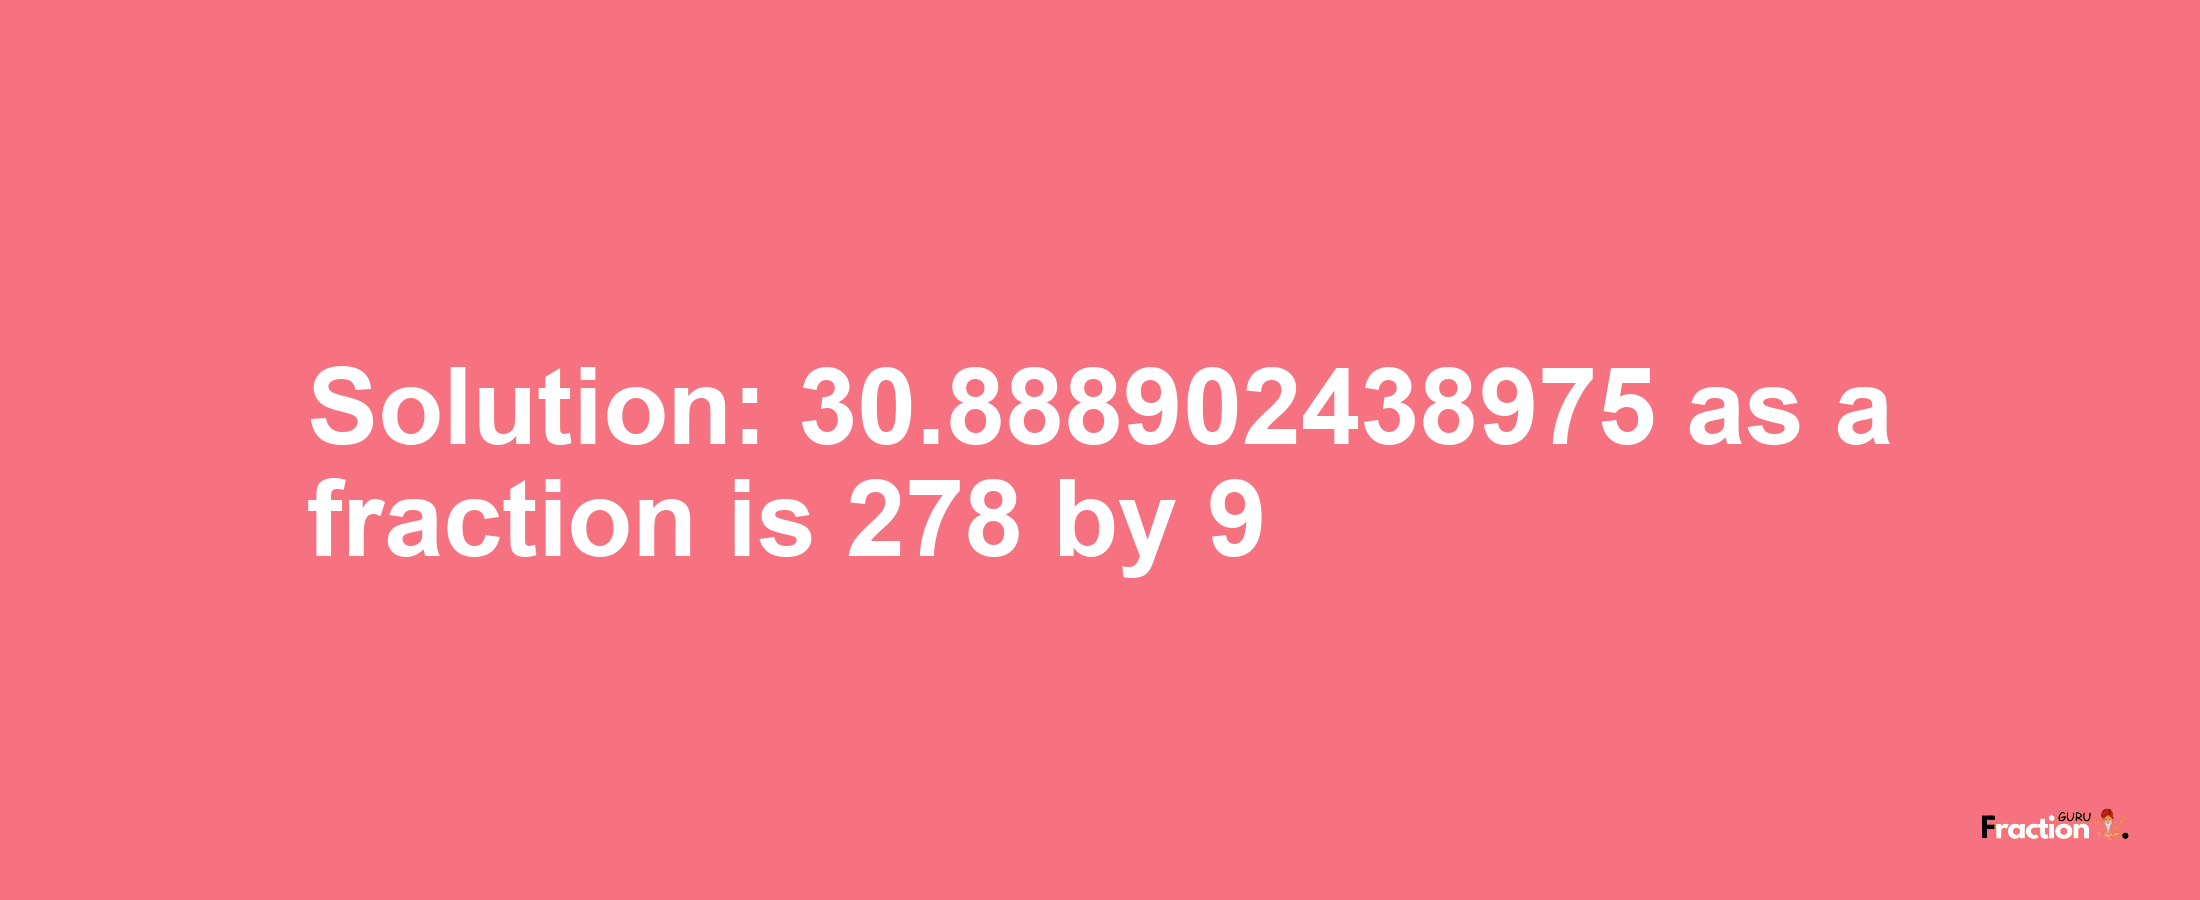 Solution:30.888902438975 as a fraction is 278/9